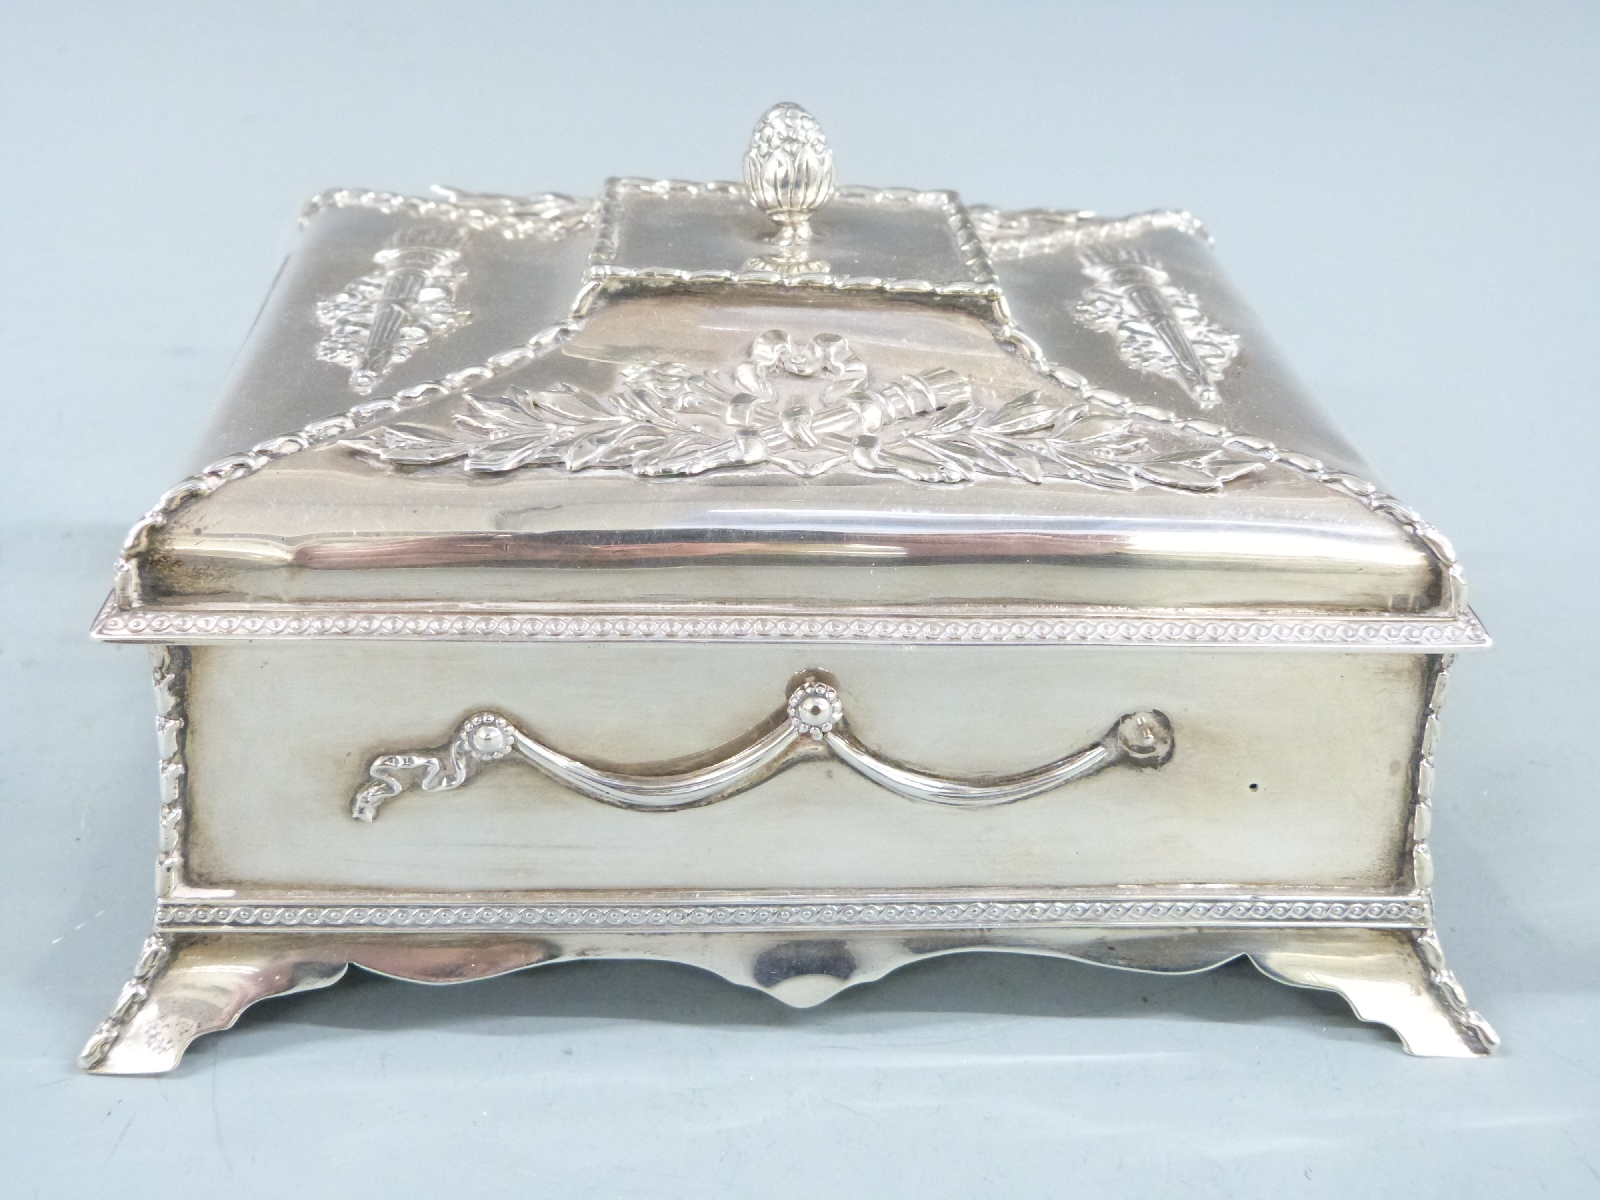 Edward VII hallmarked silver jewellery box with embossed decoration, London 1904 maker William